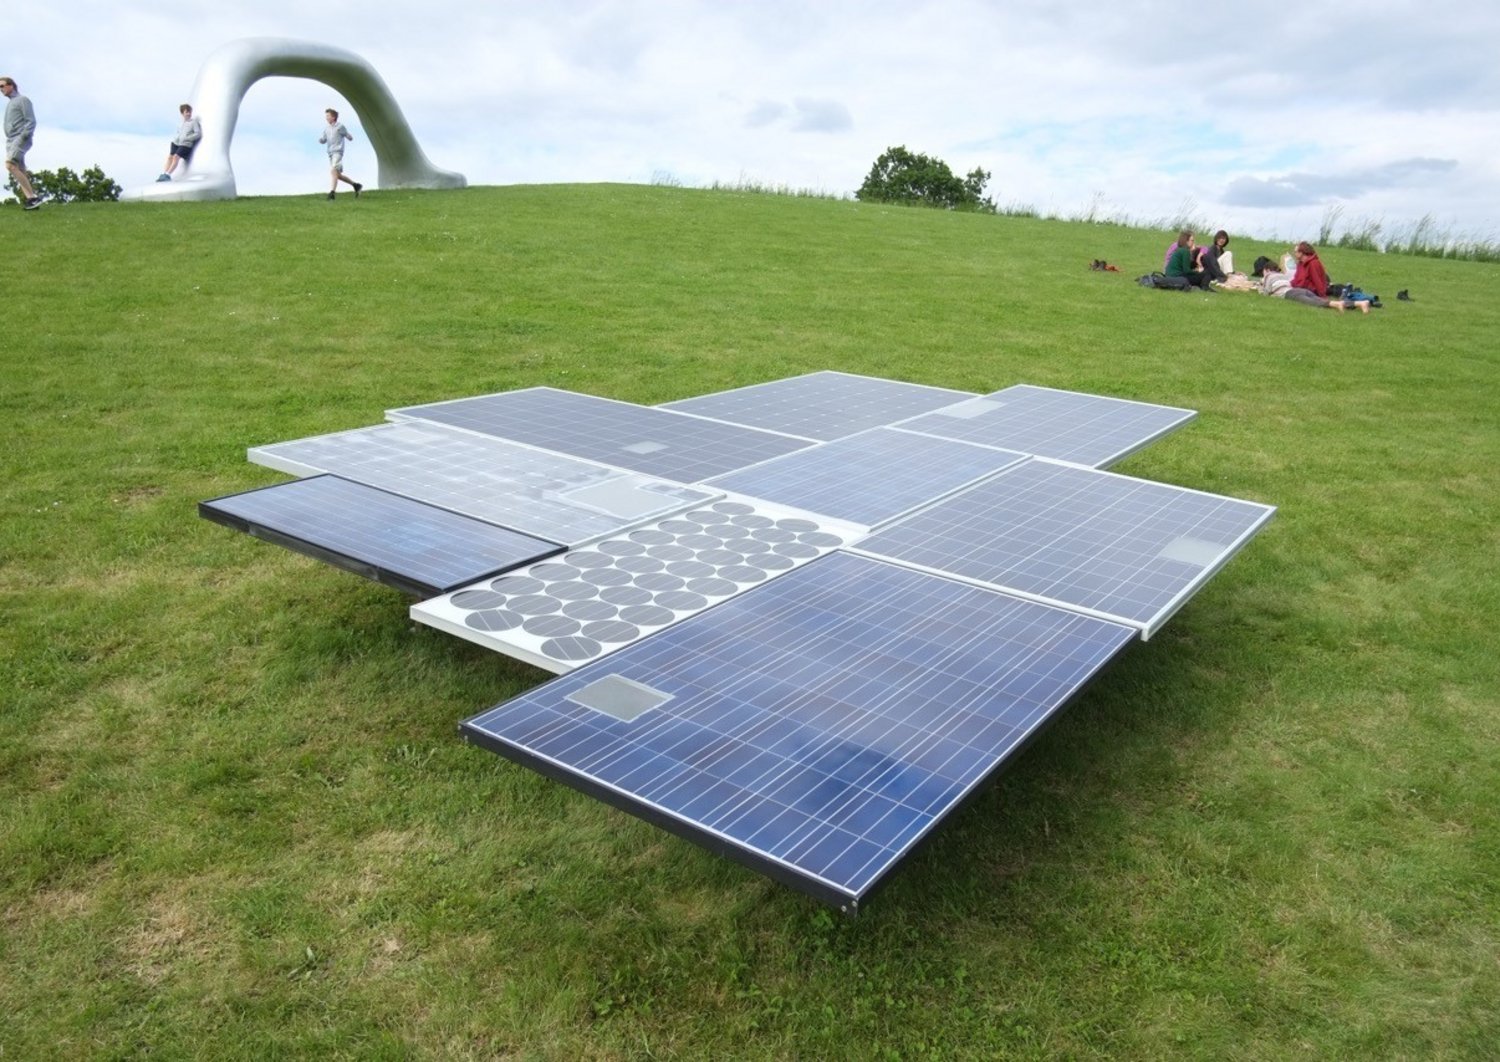 solar panels on the grass in a park